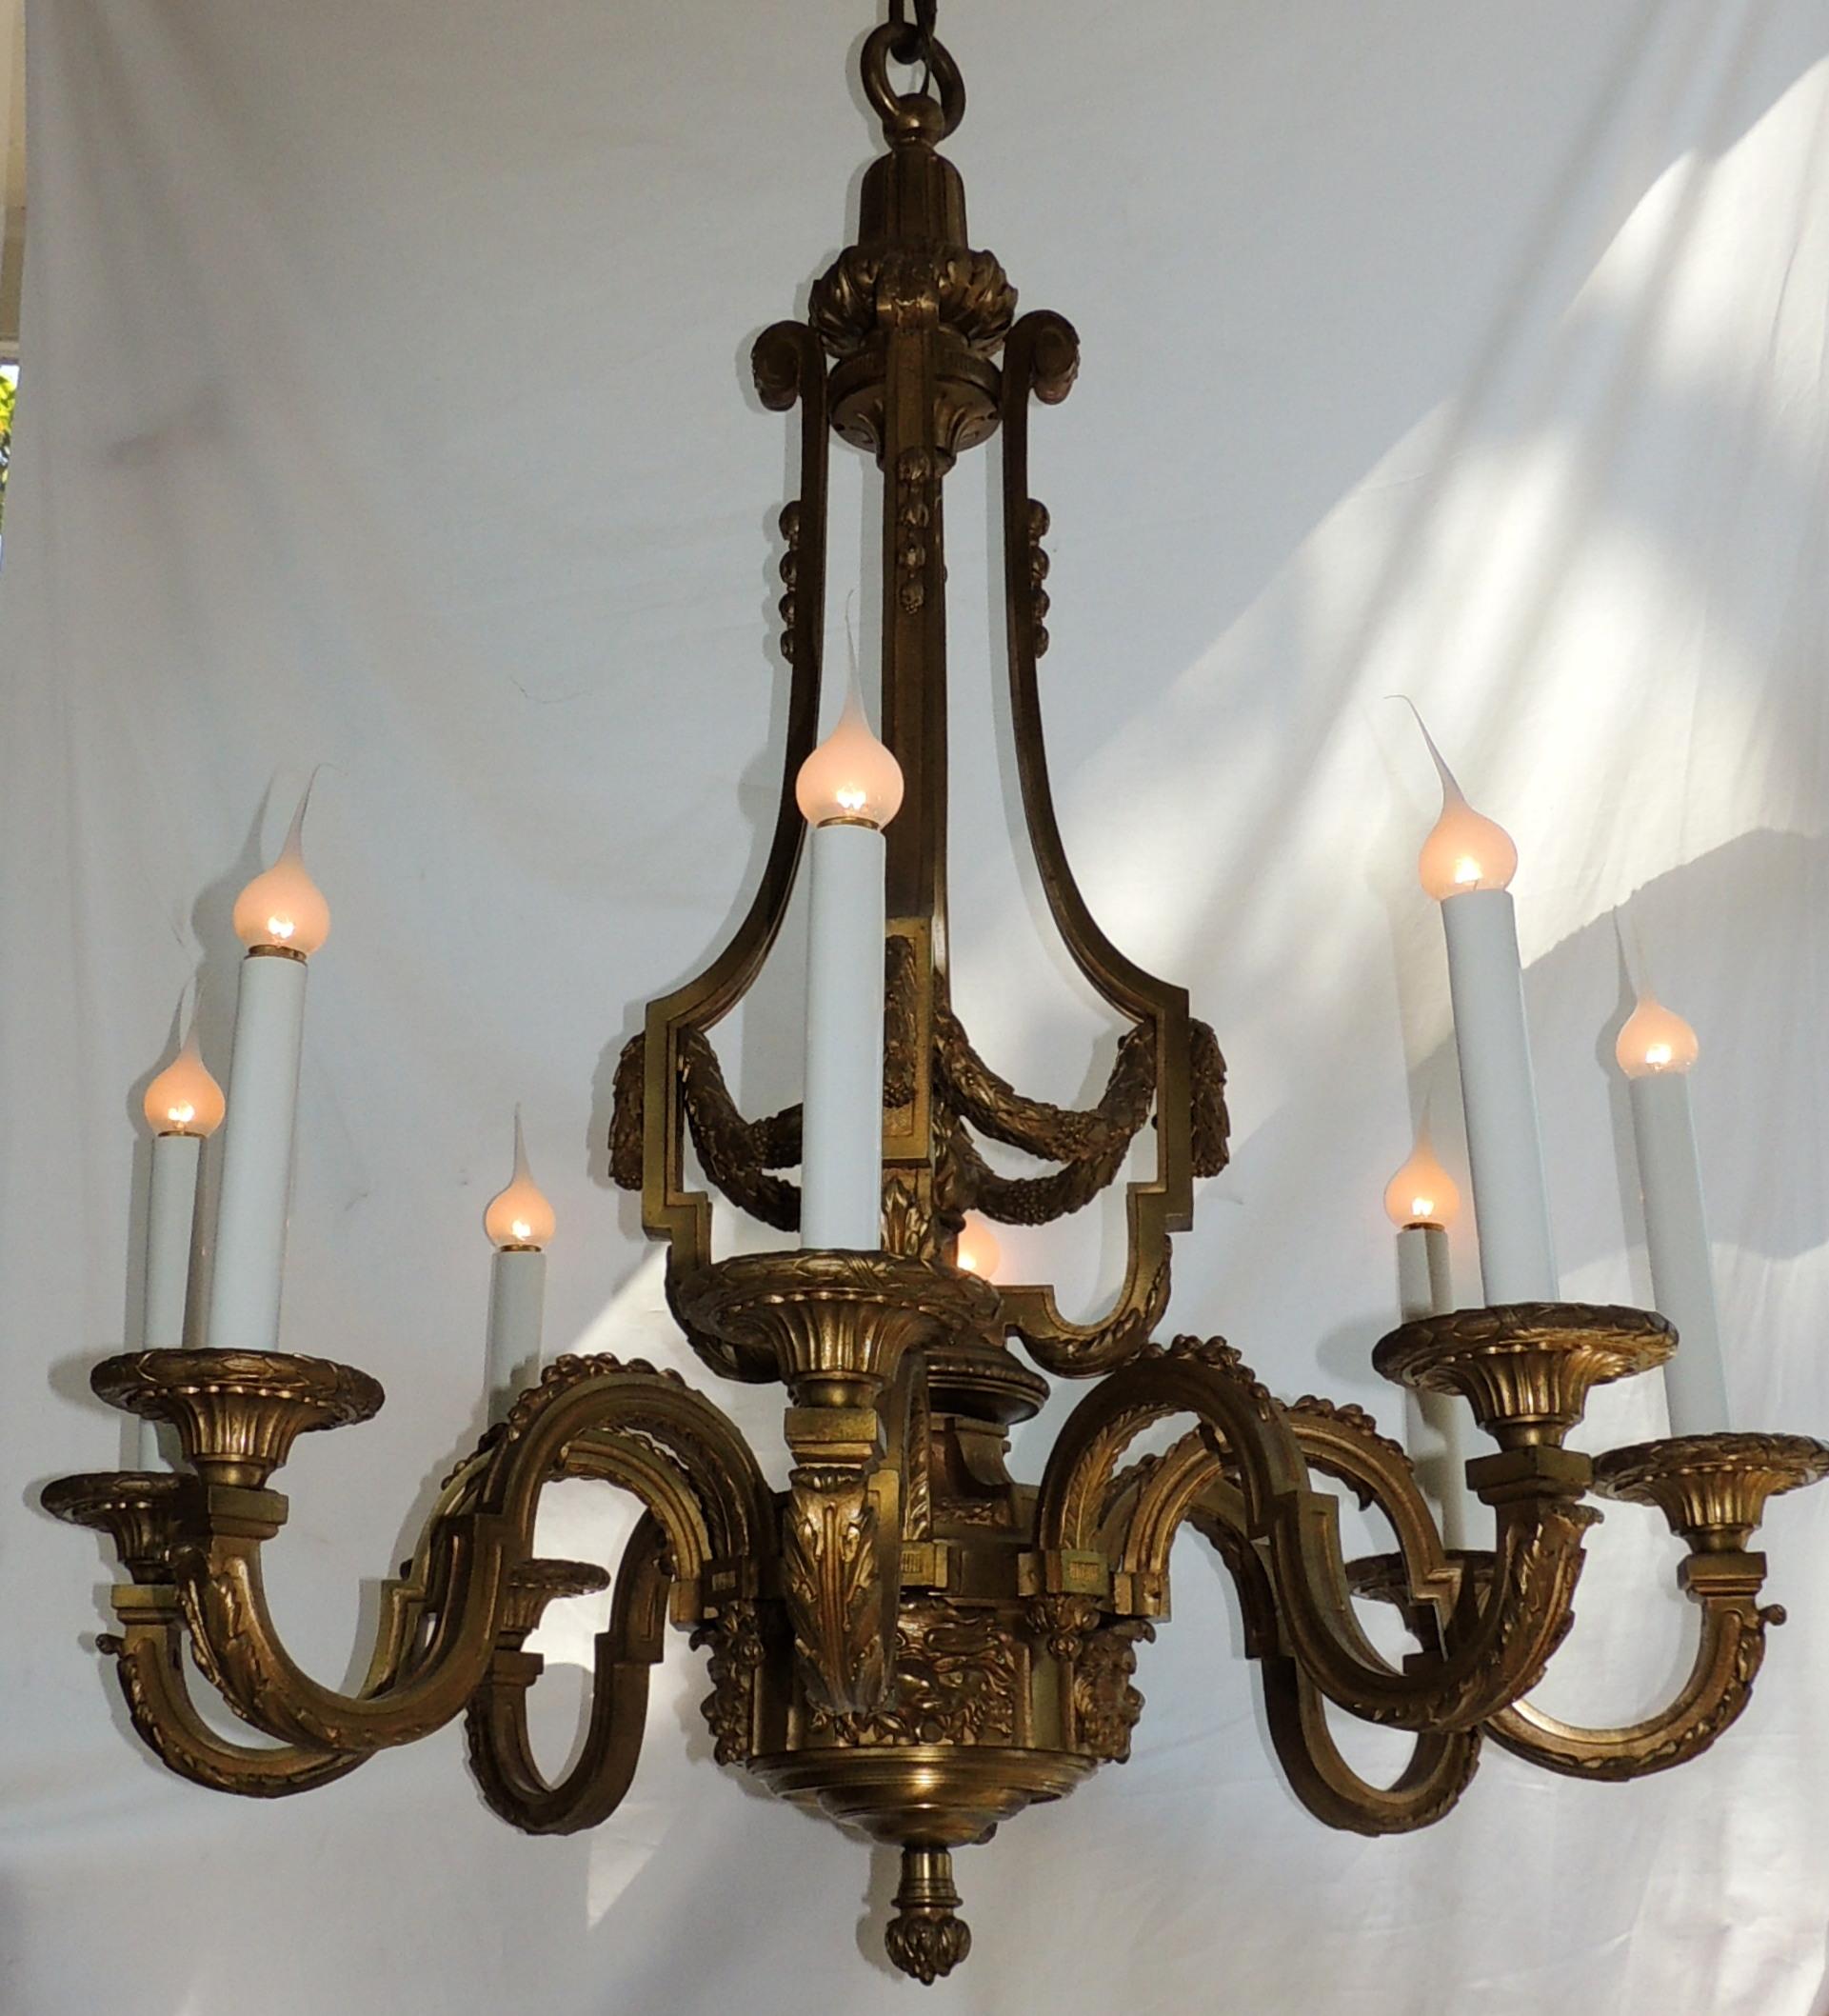 An Incredible signed Henri Vian French doré bronze neoclassical eight-light chandelier.
Henri Vian, (1860-1905) was a celebrated Parisian bronzier, specializing in the production of bronzes in the eighteenth century style and interior ornamentation